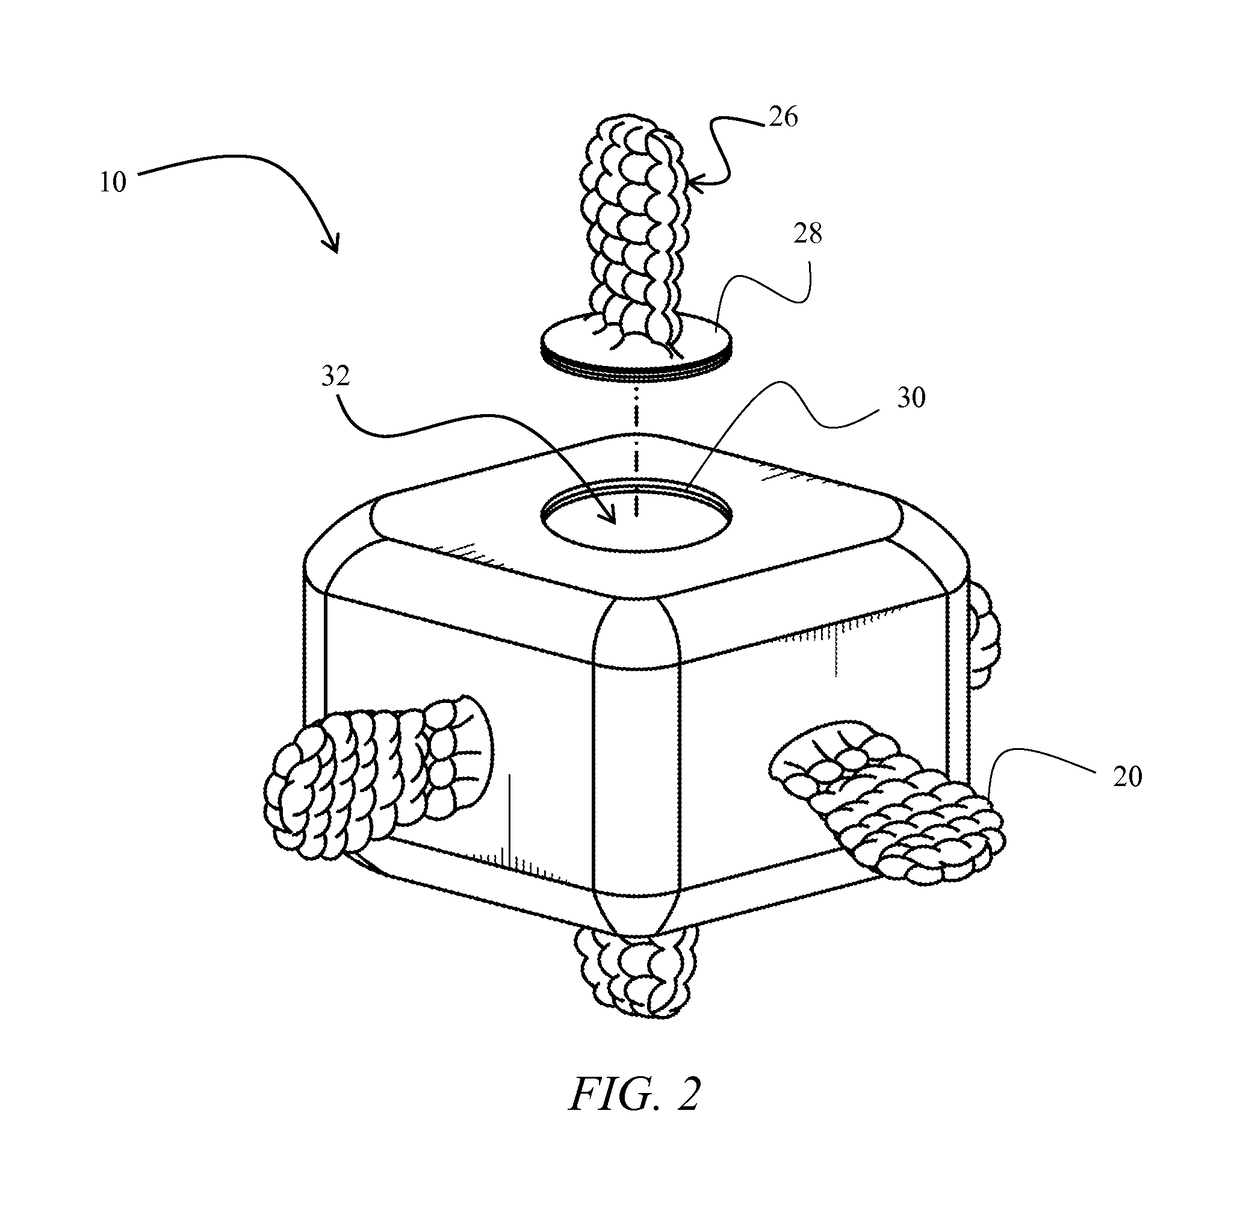 Multi-lobed cooled teething device